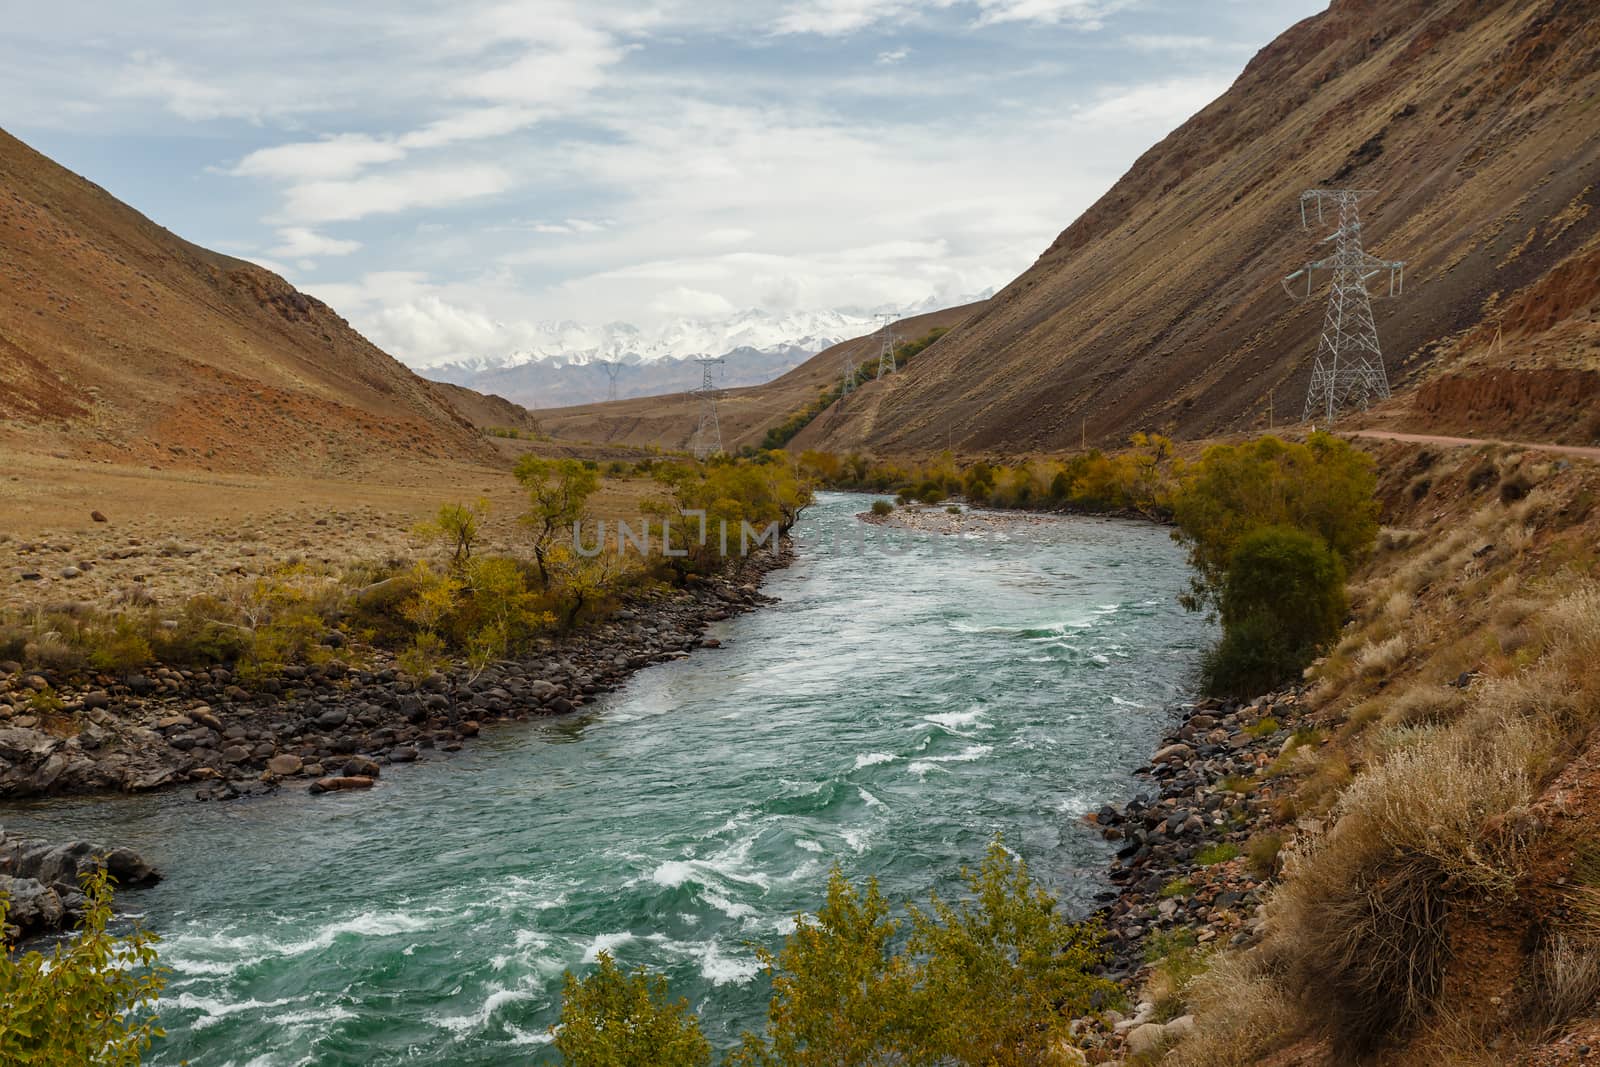 Kokemeren river, Aral, Jumgal District, Kyrgyzstan, road and power lines in the gorge